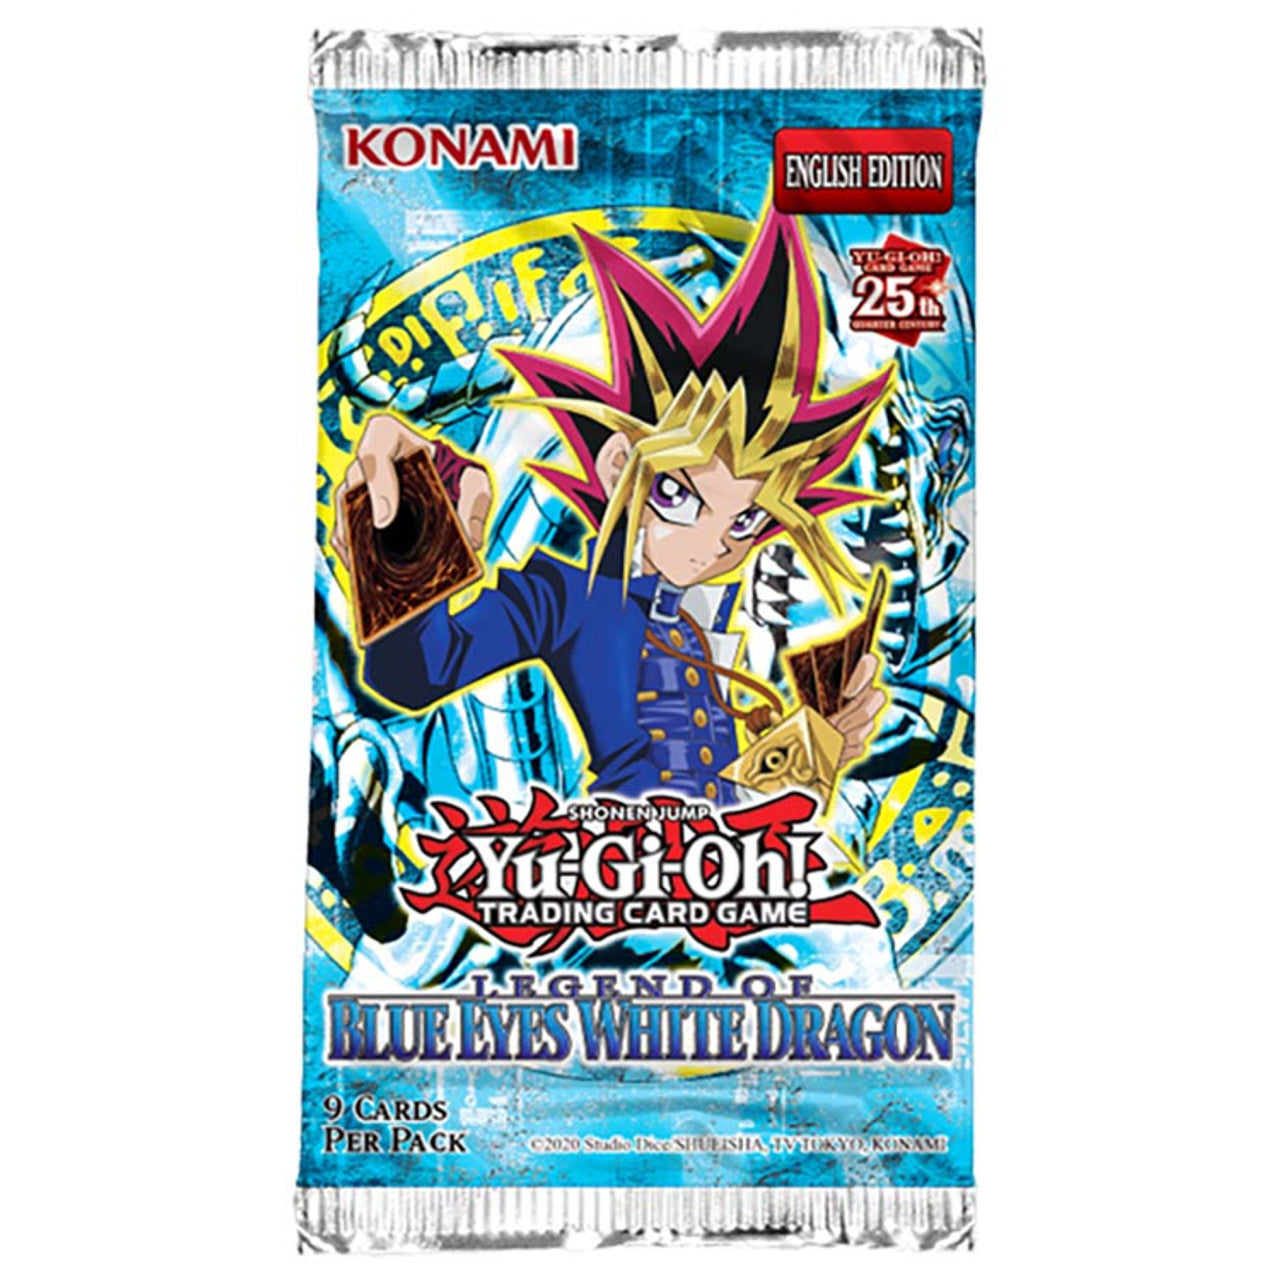 Legend of Blue Eyes White Dragon Booster Box Case (25th Anniversary Edition) (Sealed Case)